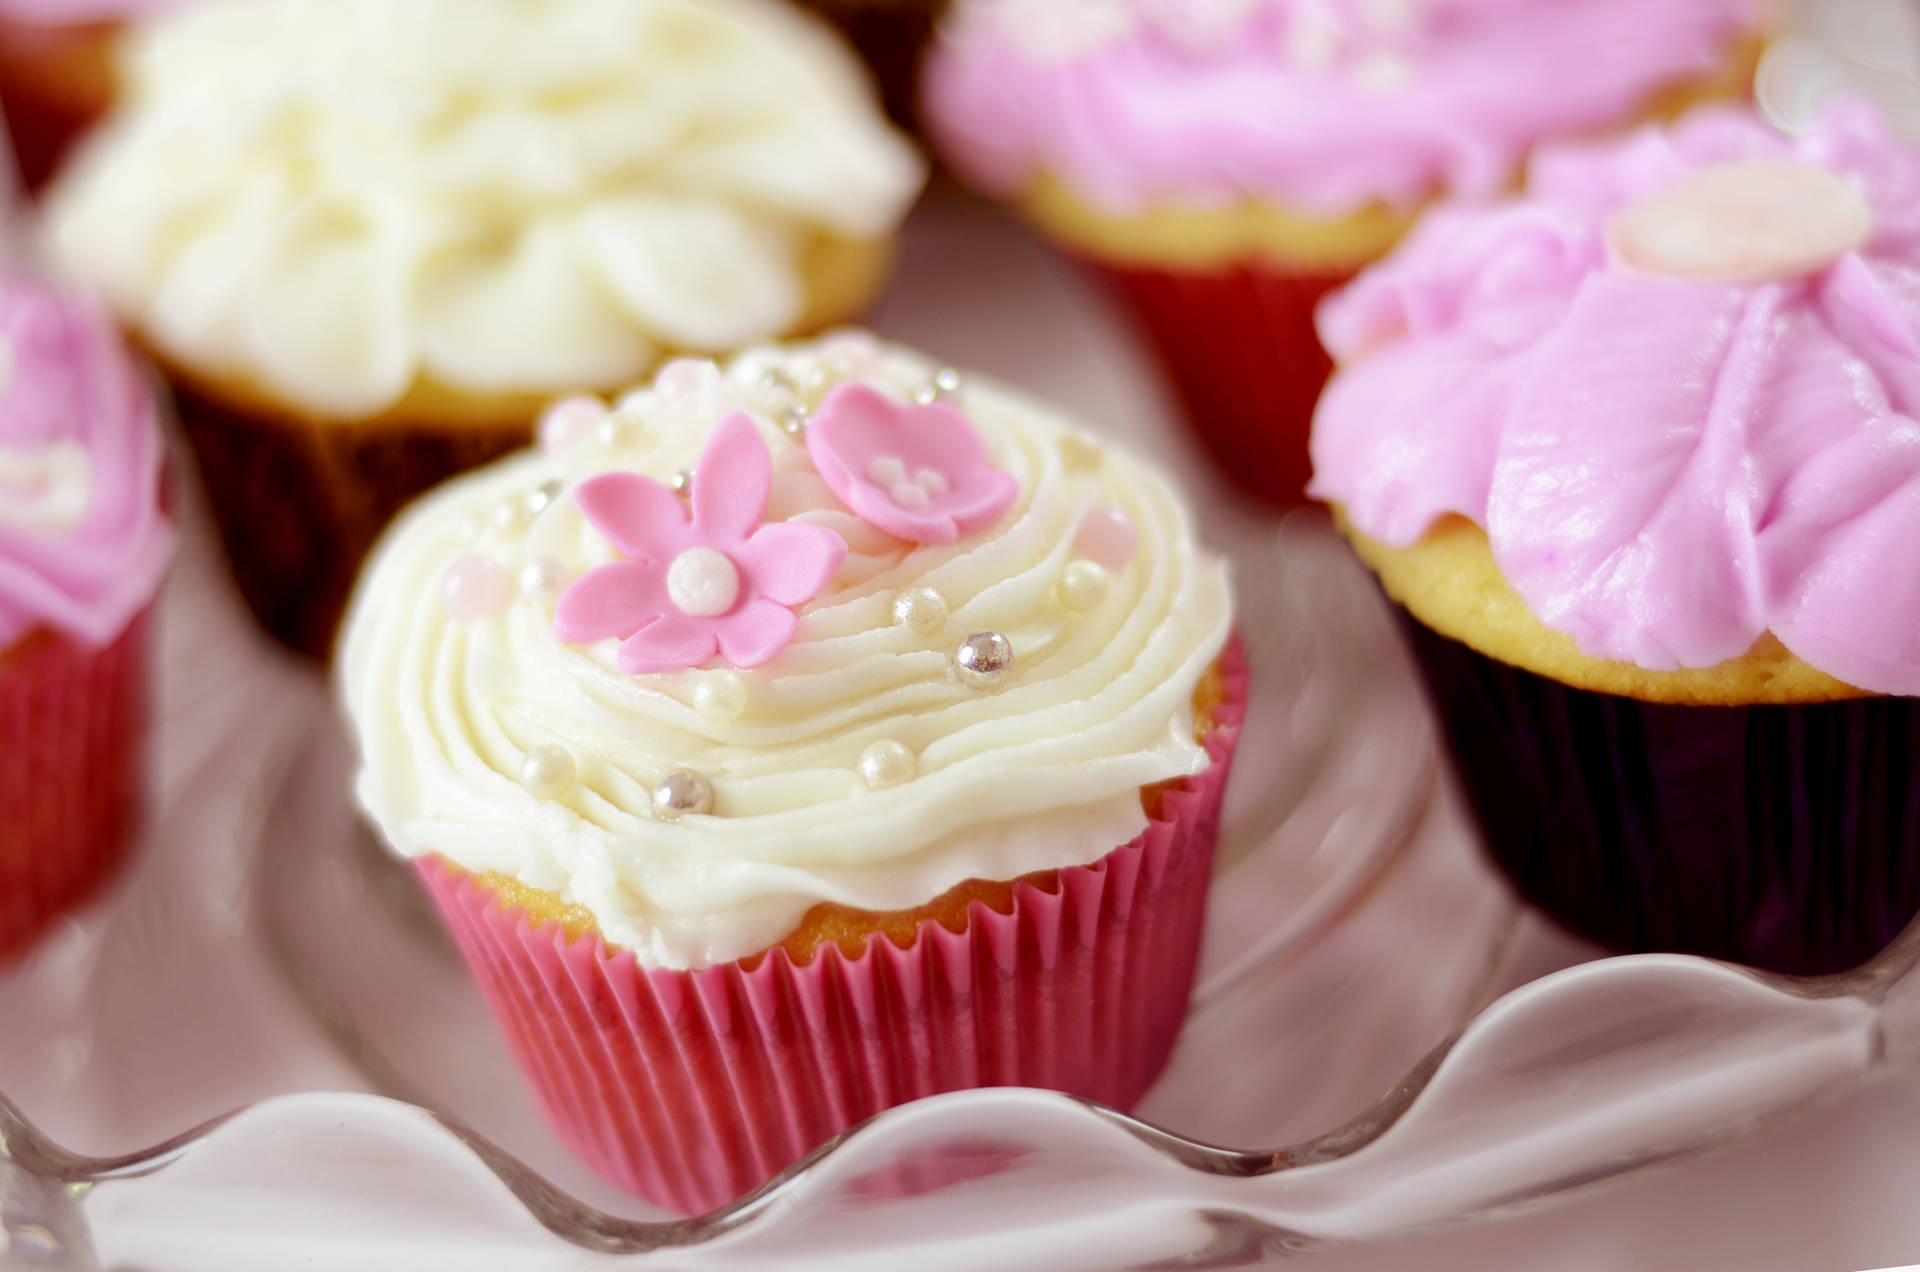 Cupcake 4257X2820 Wallpaper and Background Image